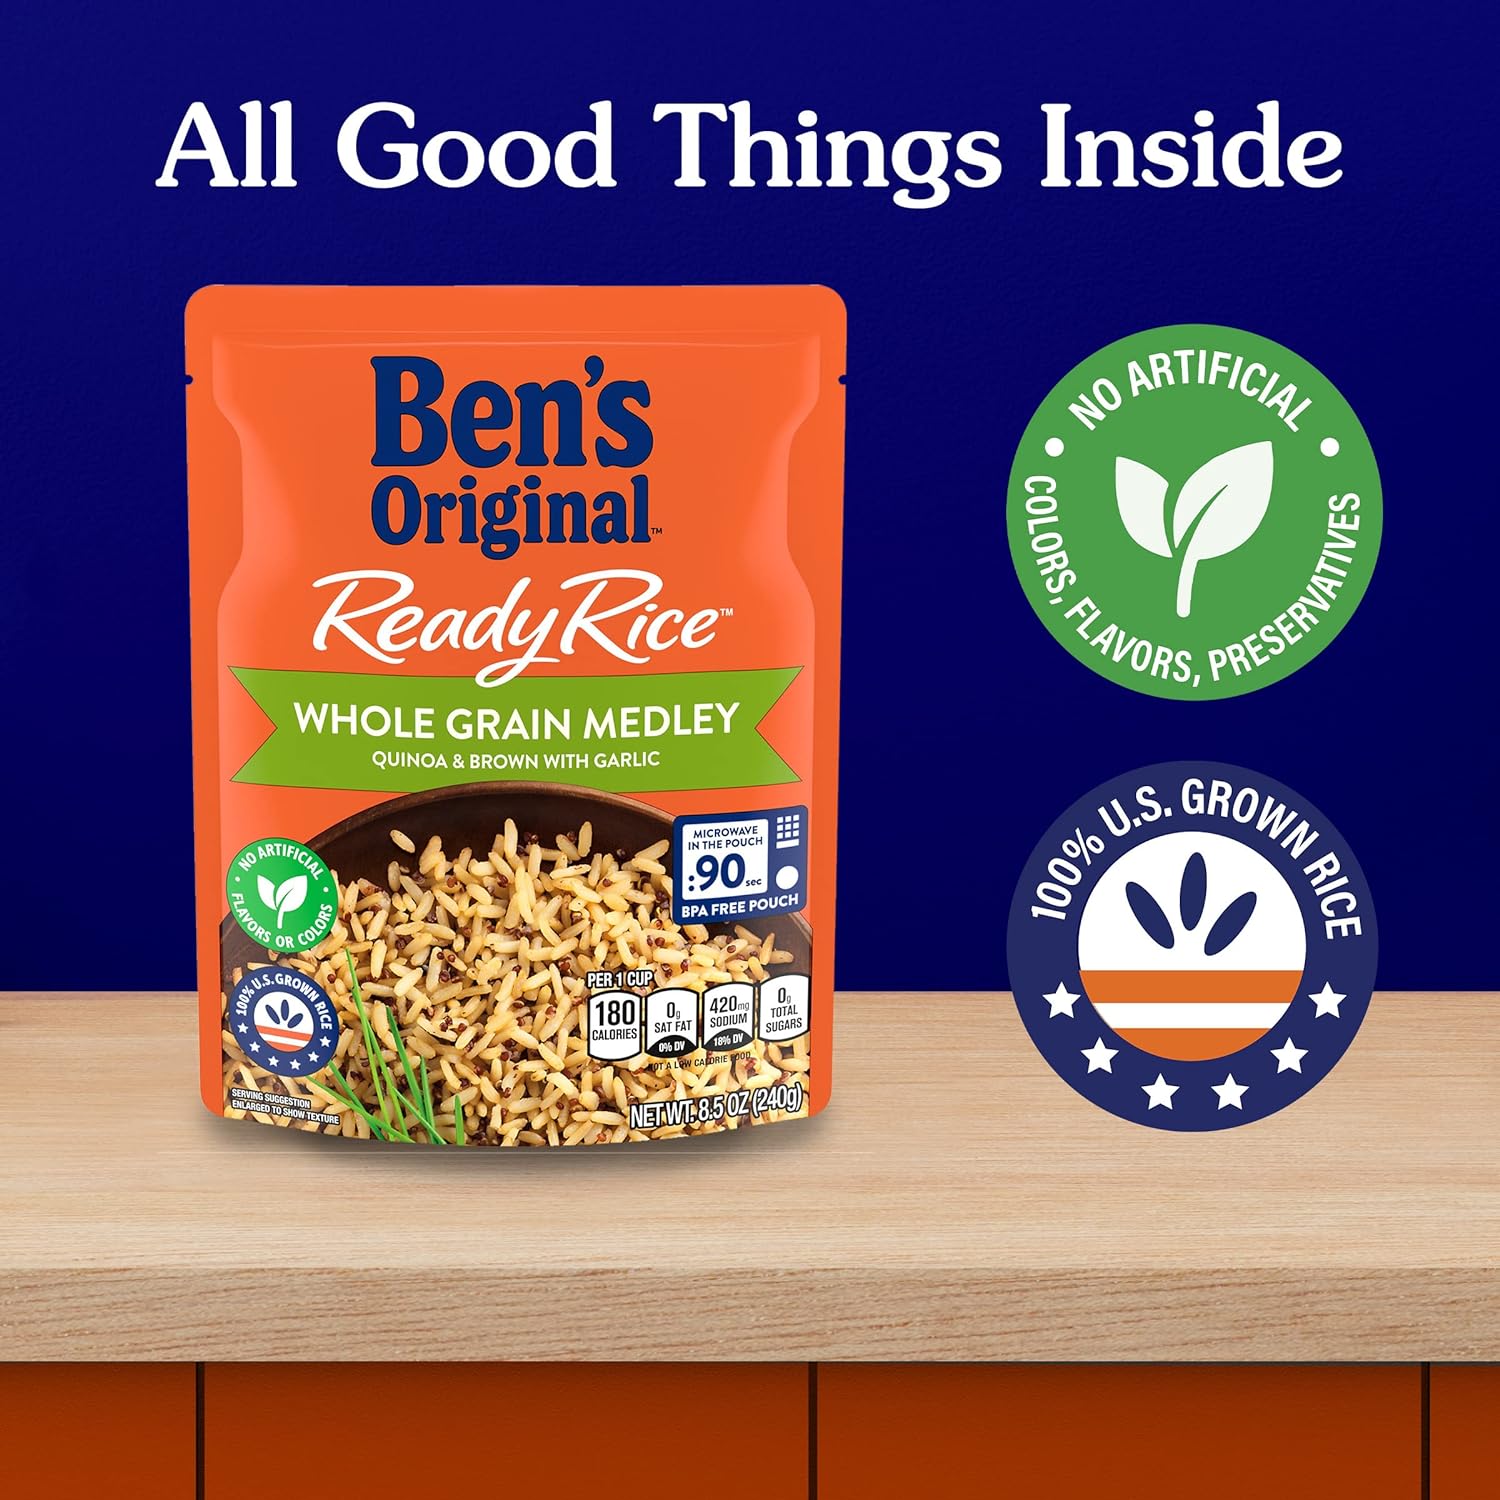 BEN'S ORIGINAL Ready Rice Whole Grain Medley Quinoa and Brown Flavored Rice, Easy Dinner Side, 8.5 OZ Pouch (Pack of 12) : Everything Else